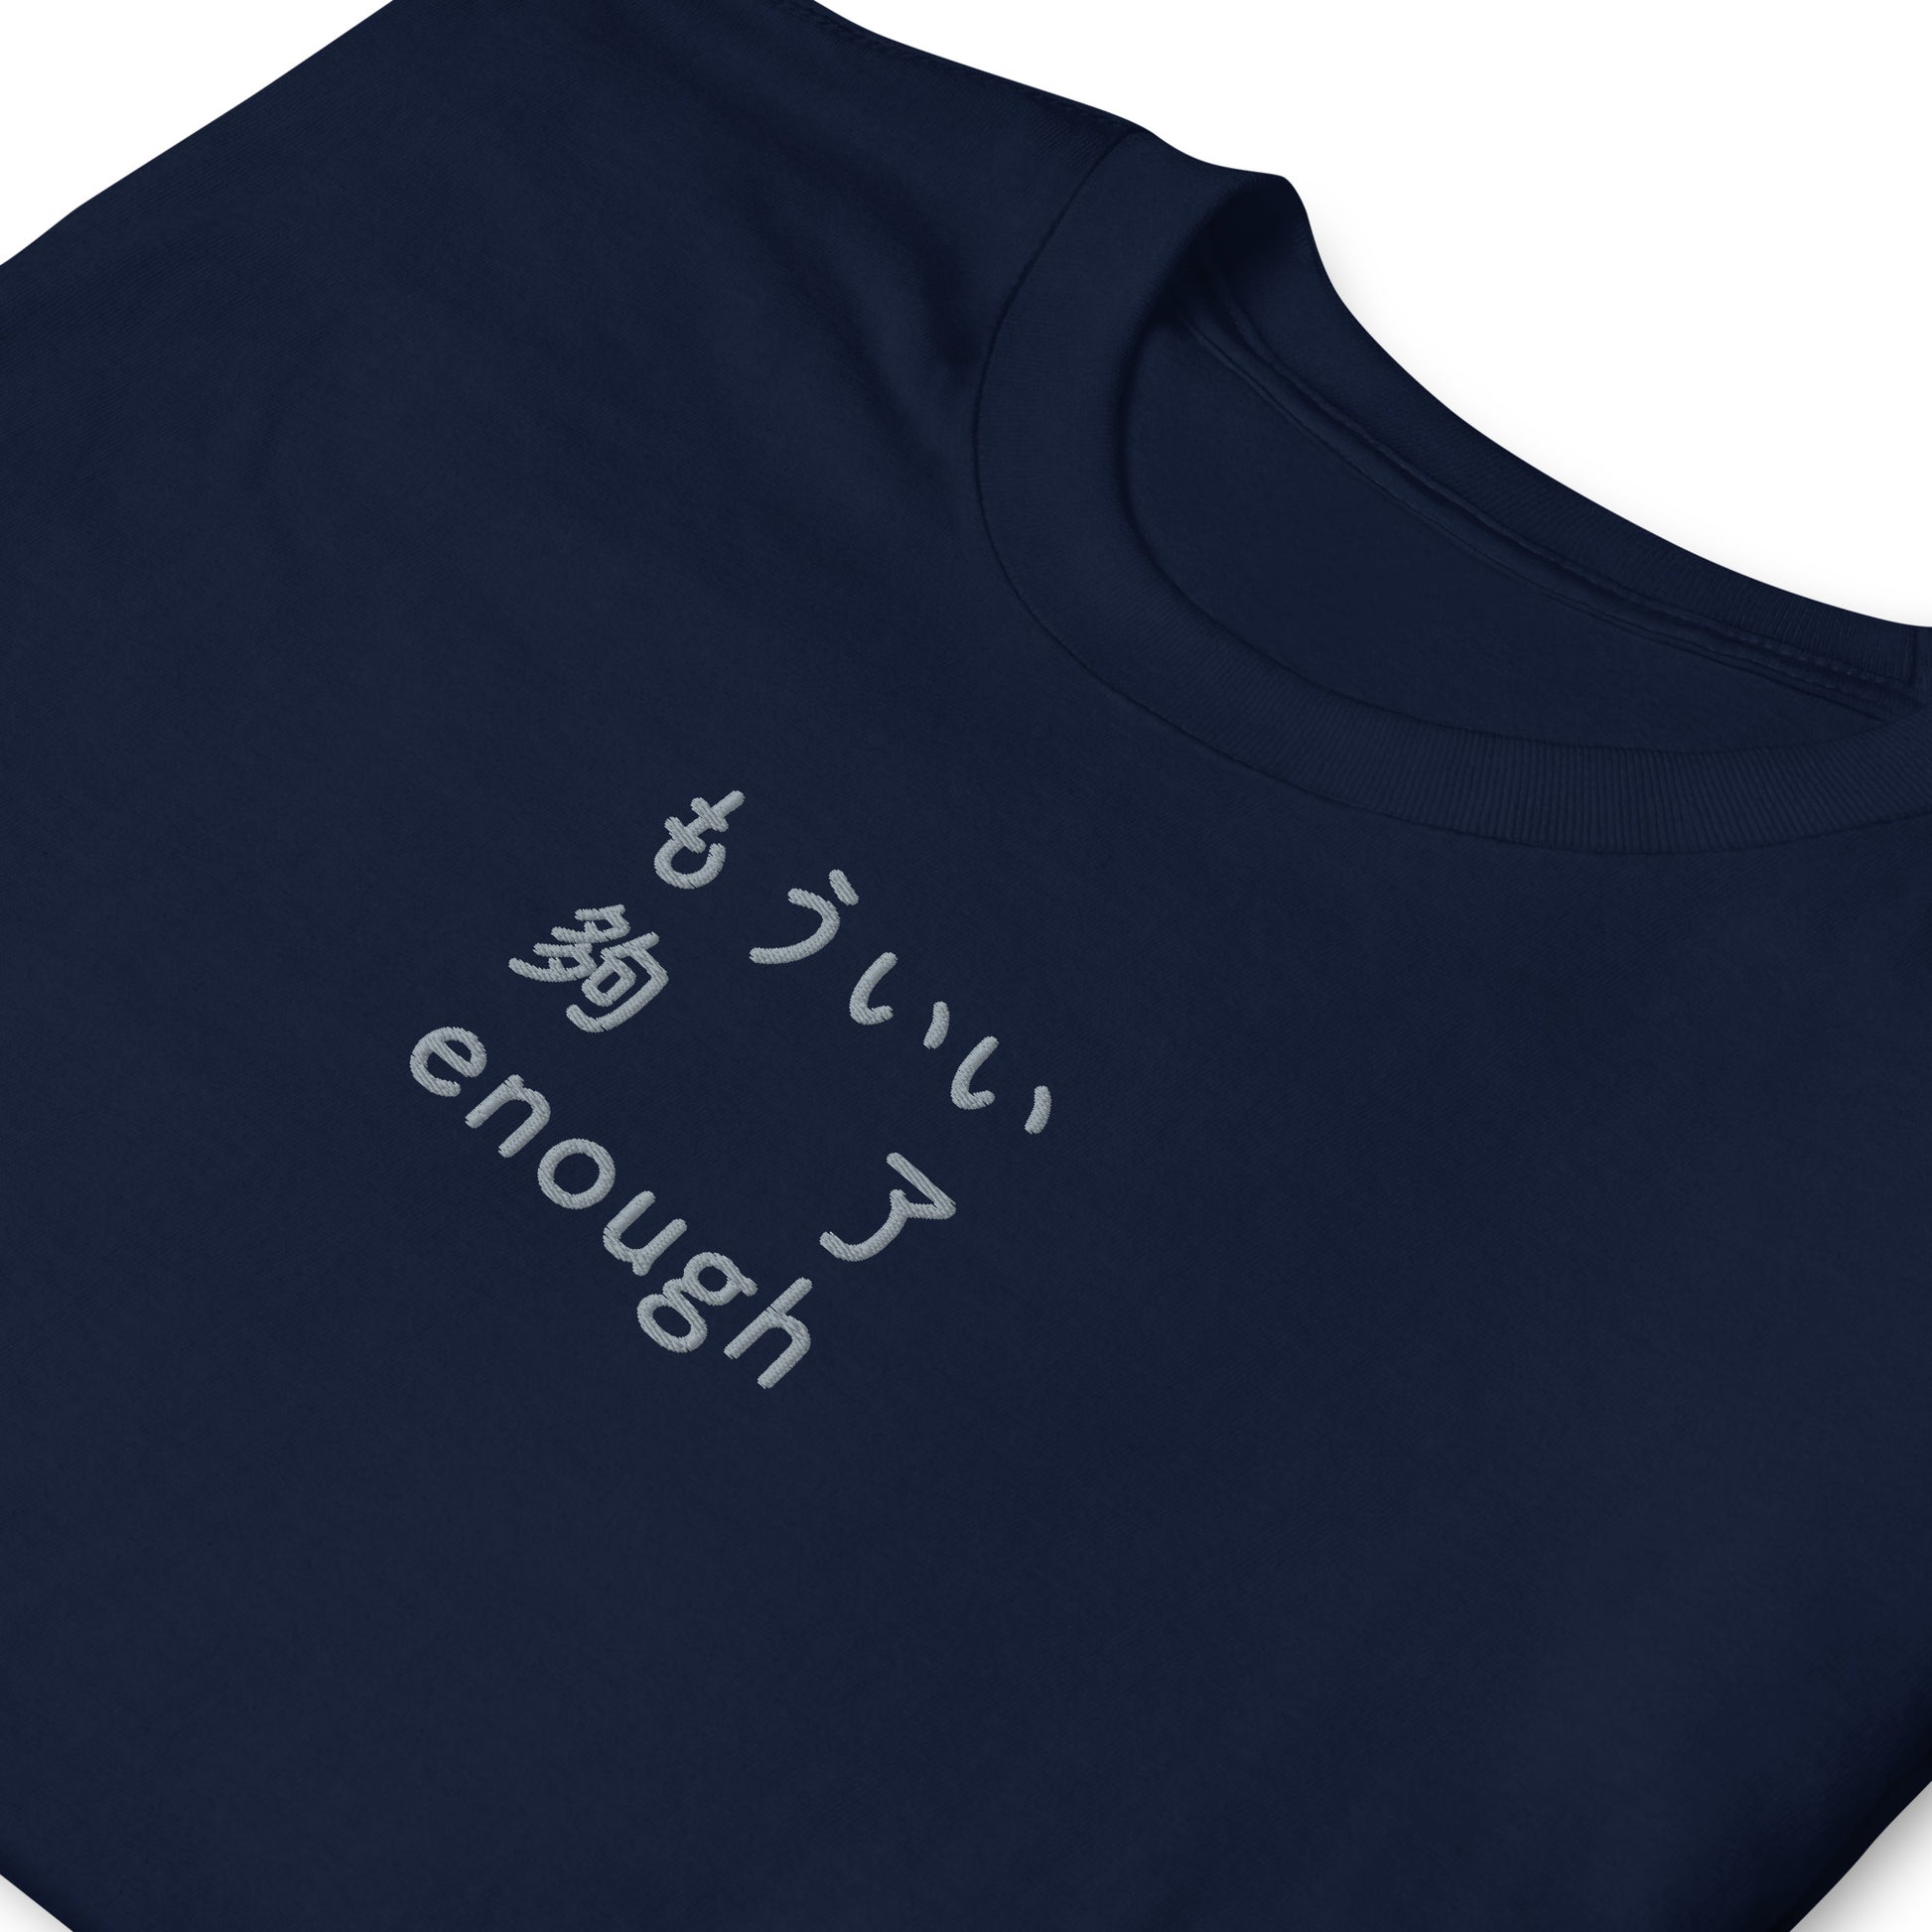 Navy High Quality Tee - Front Design with an light gray Embroidery "Enough" in Japanese,Chinese and English